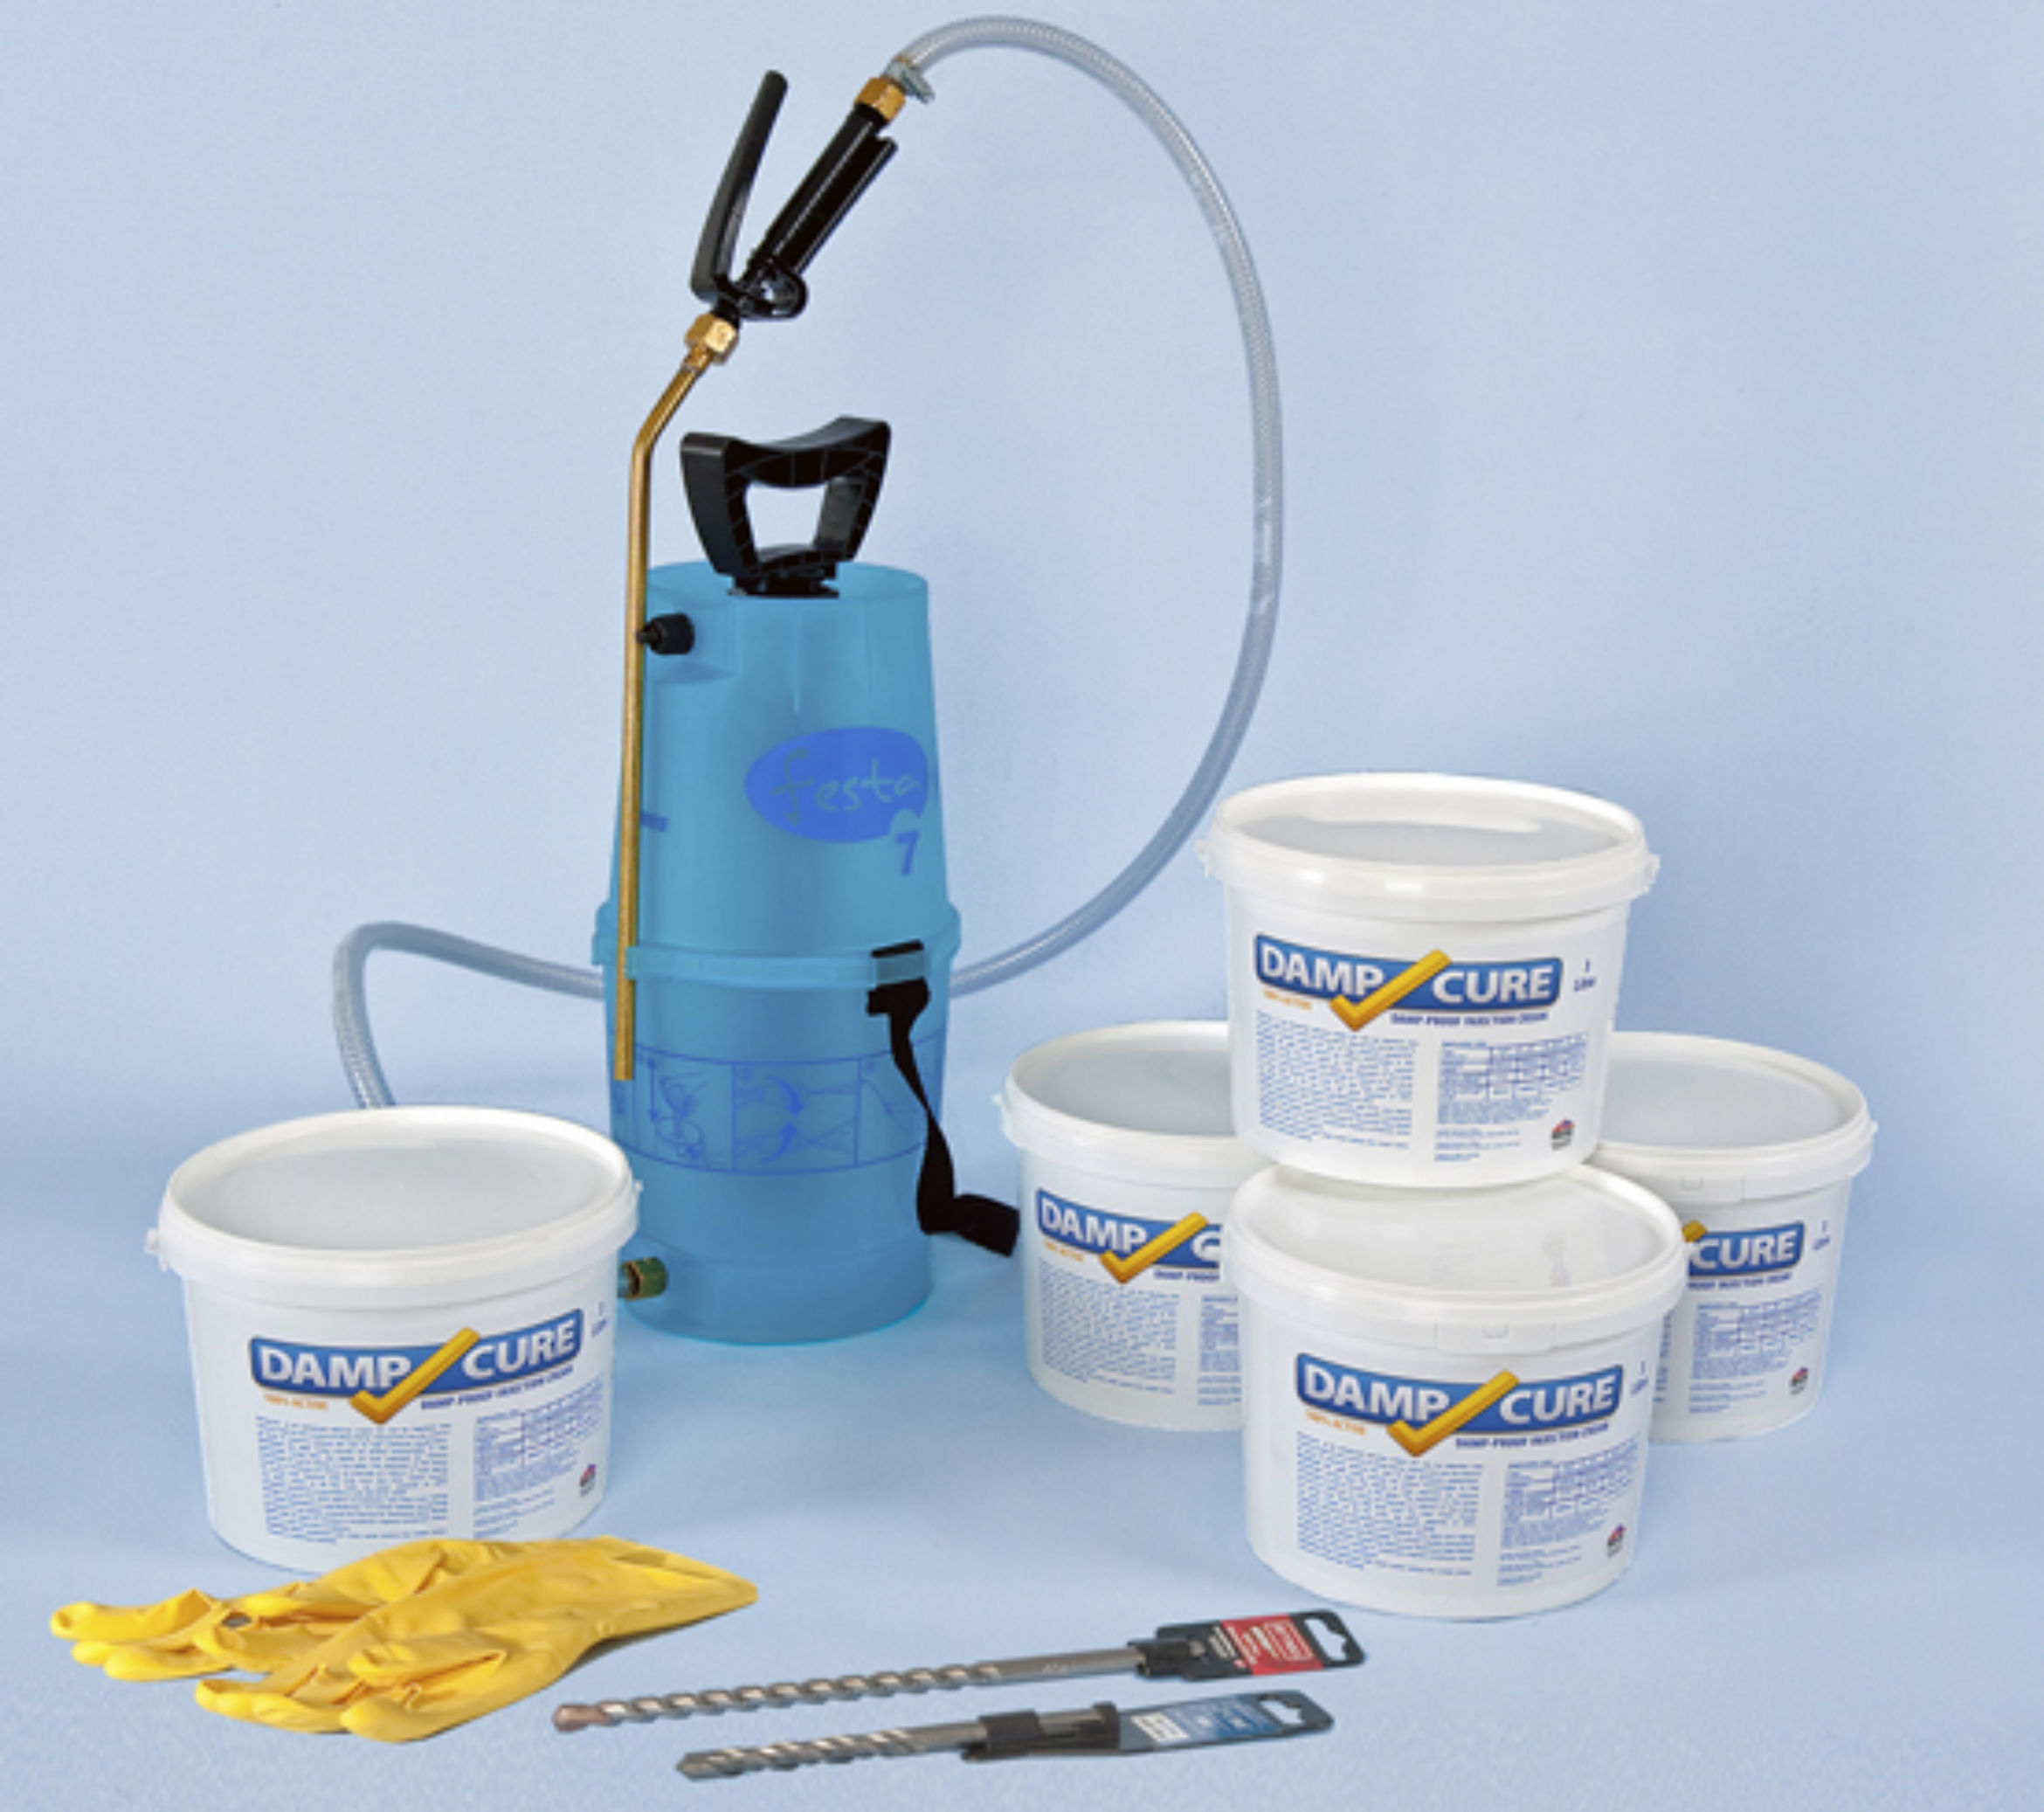 damp proofing injection kit